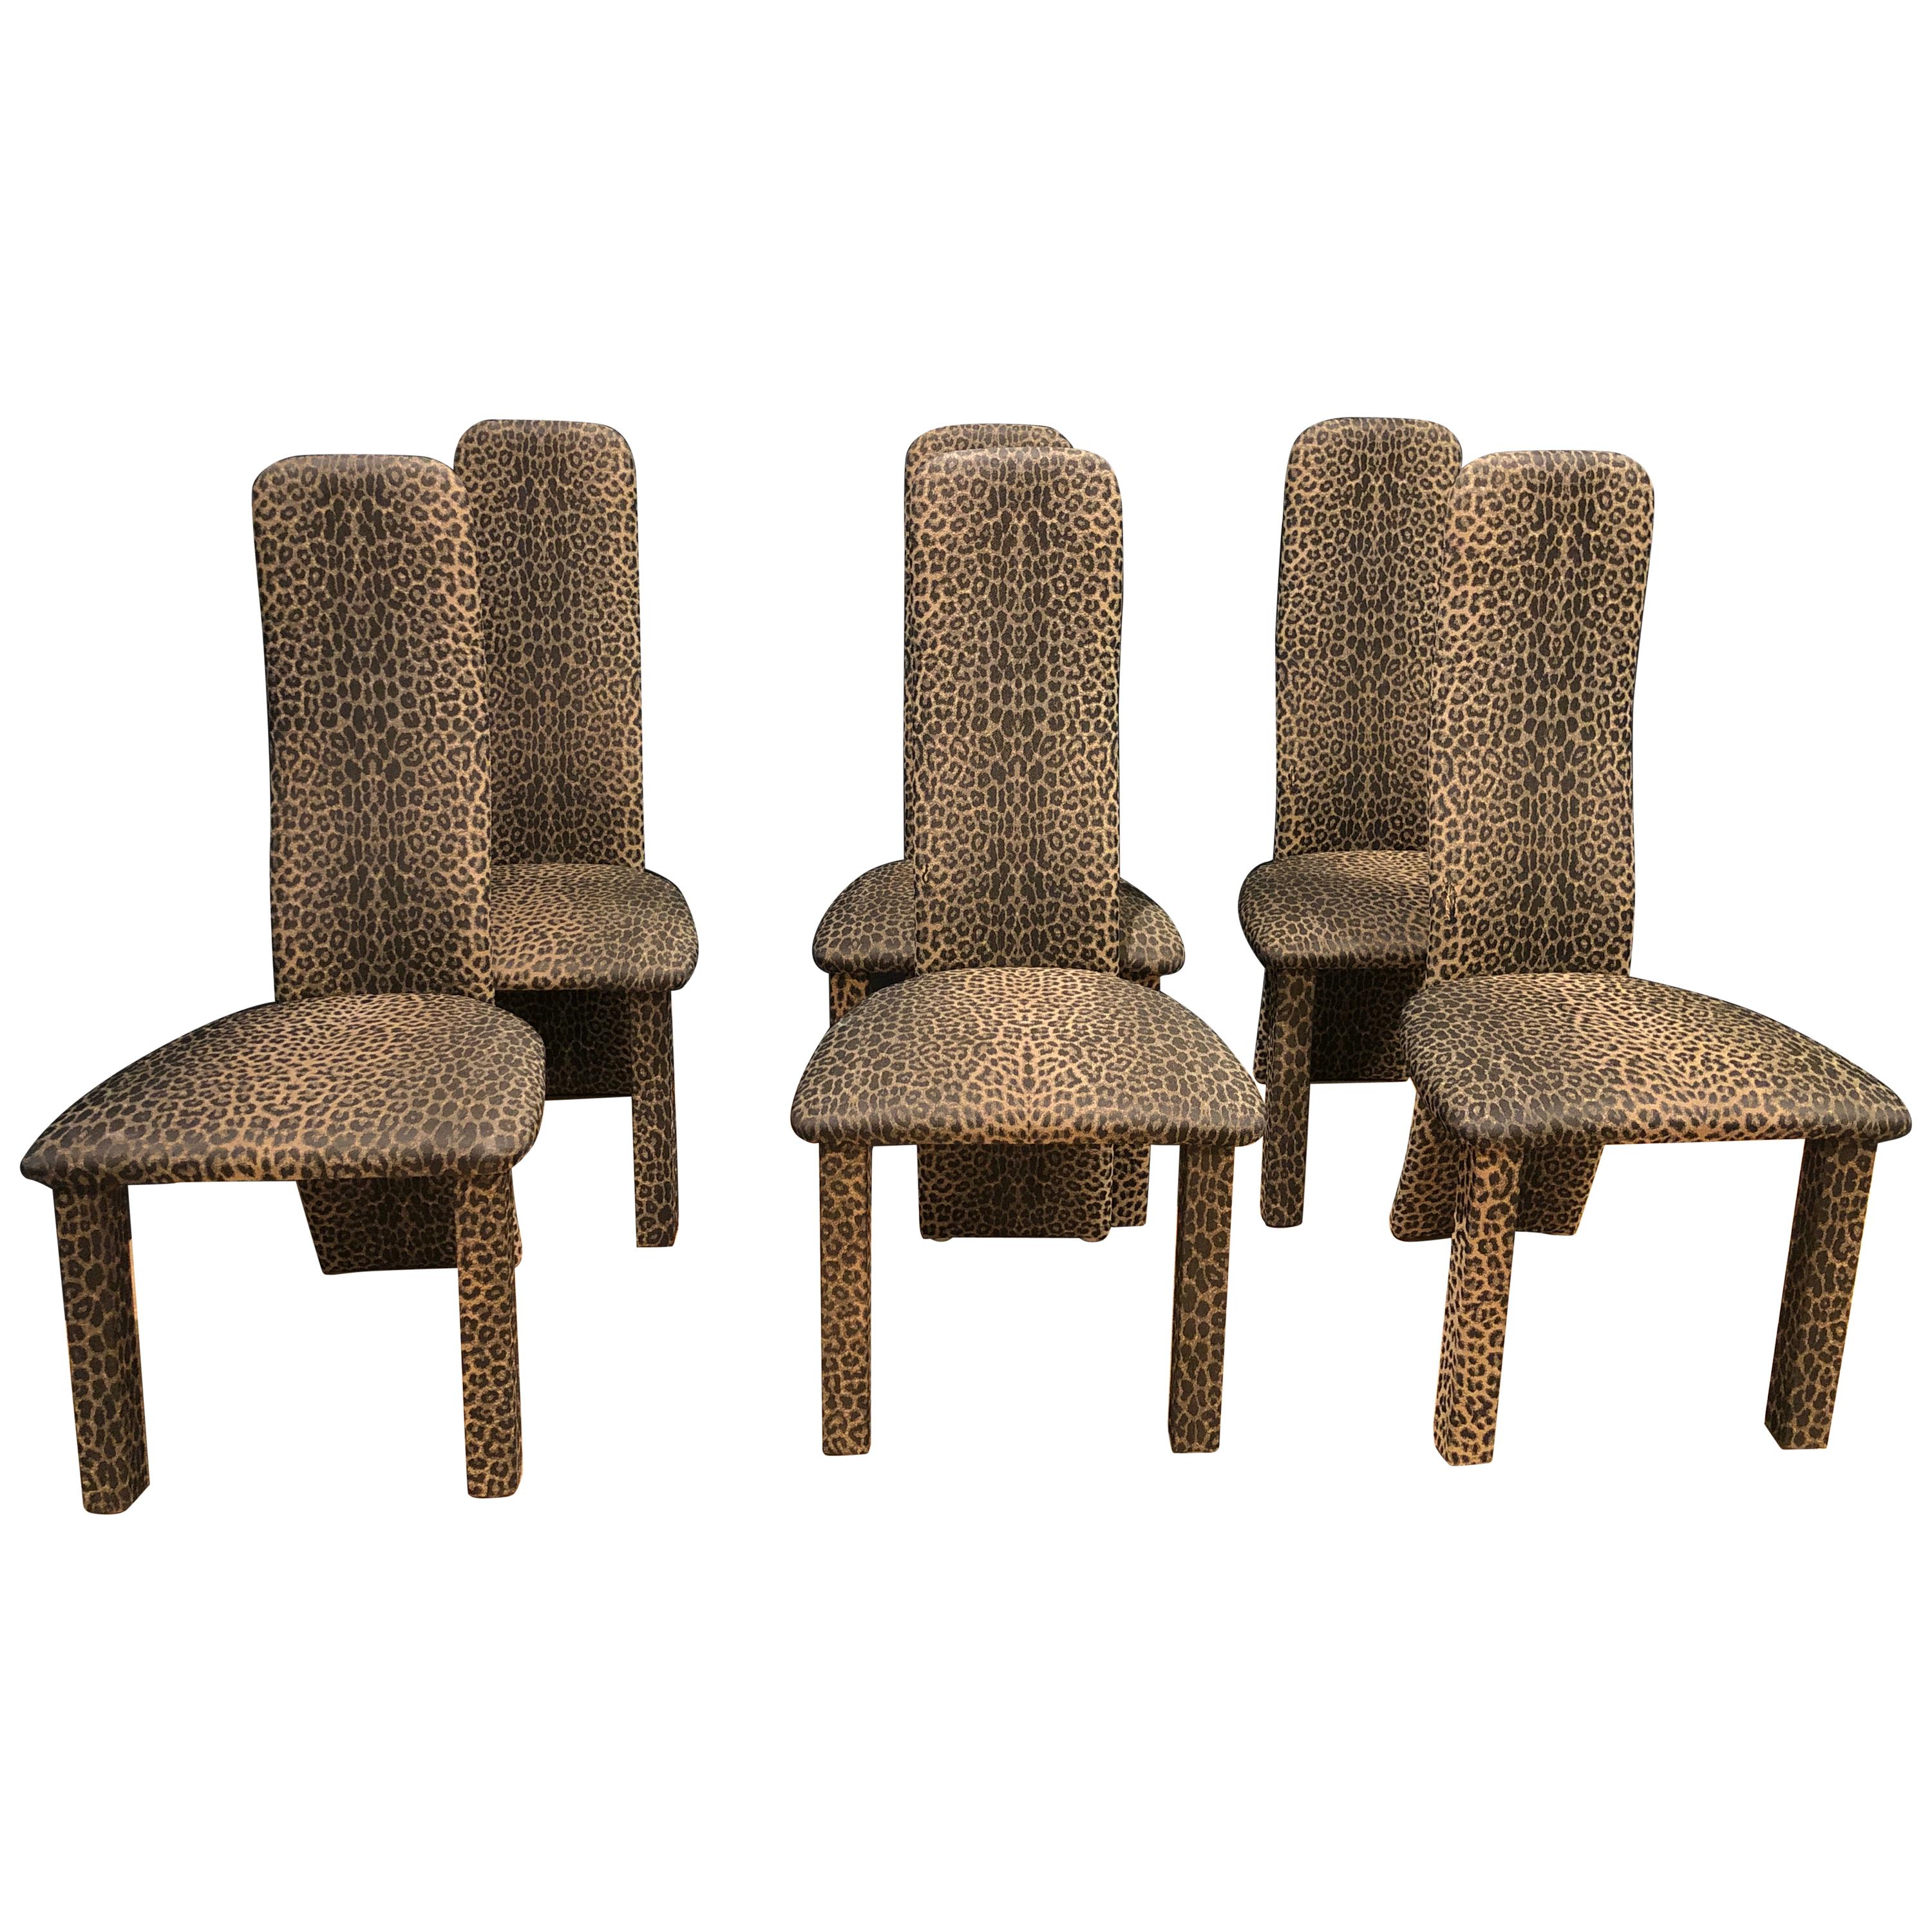 Set of 6 Leopard Print High back Dining Chairs